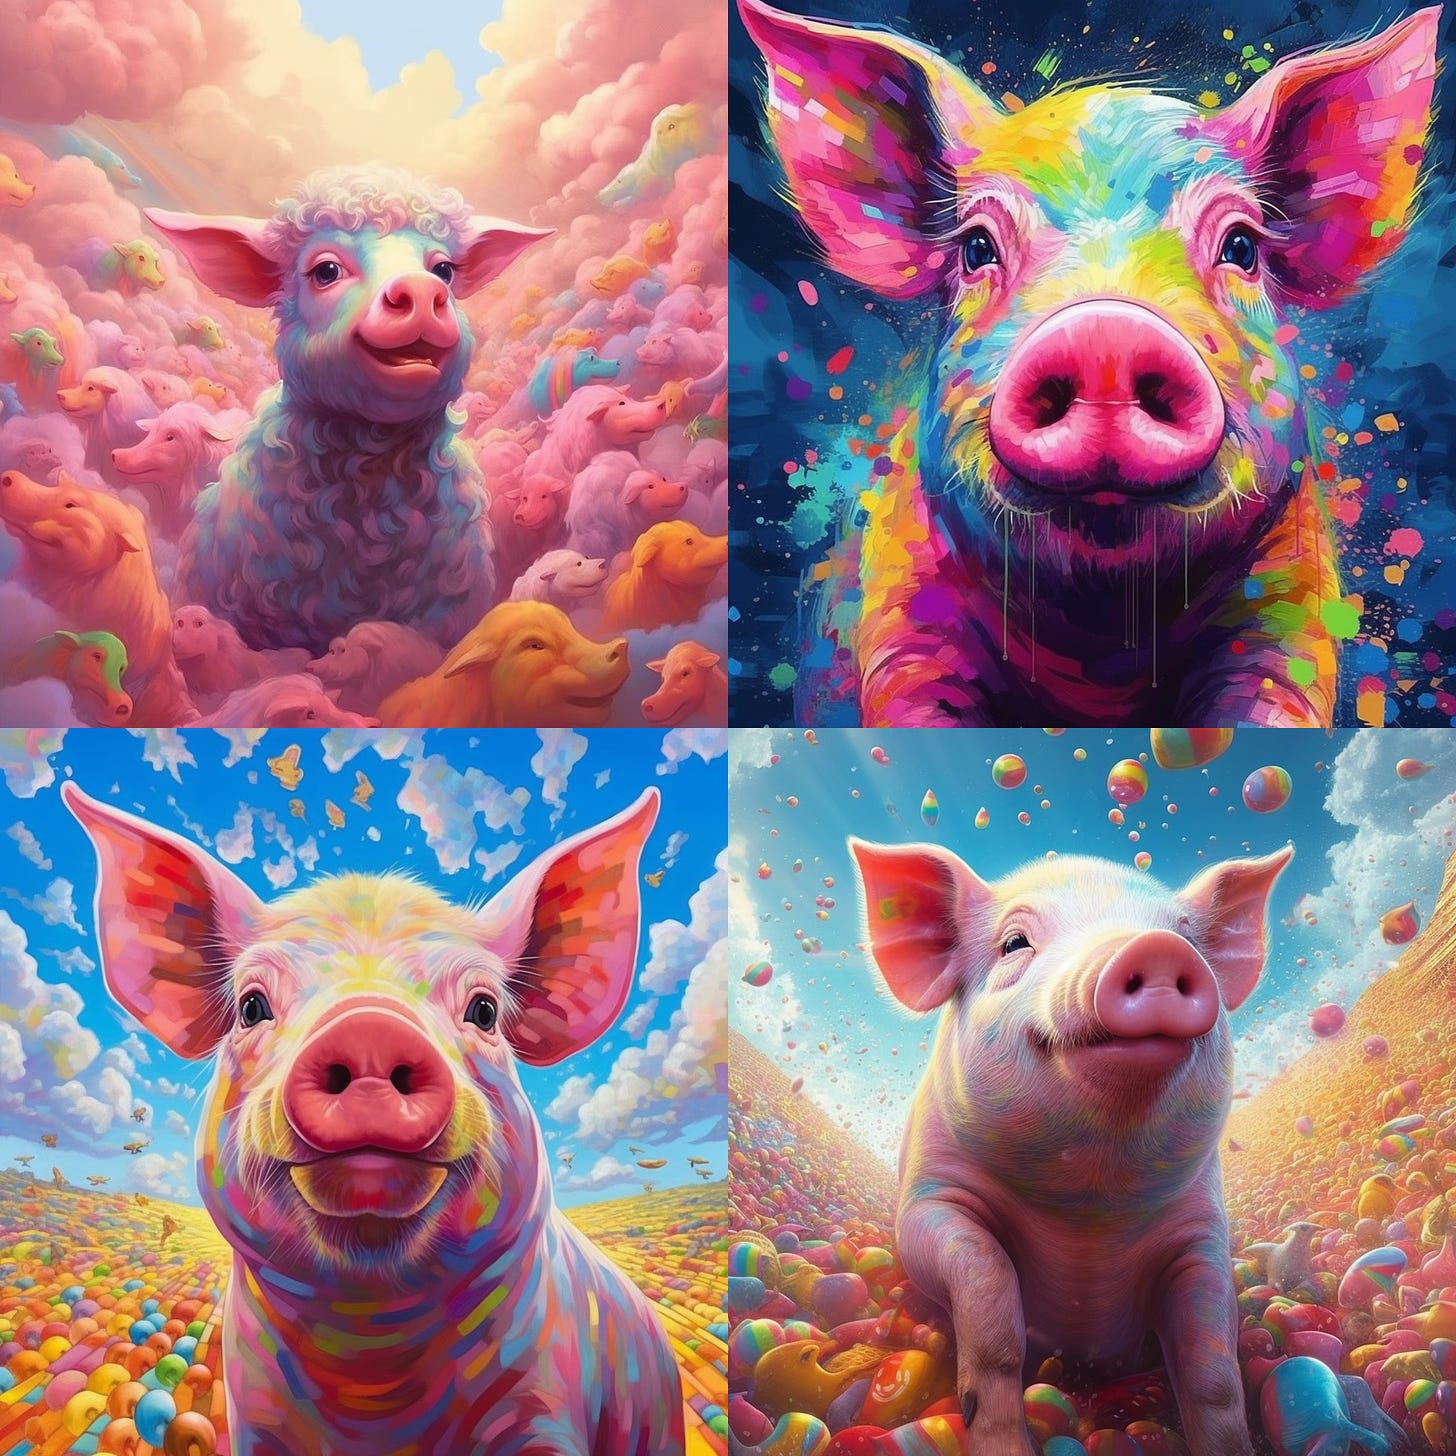 Midjourney V5.1 results for the pig + rainbow emoji combo. 4-image grid.